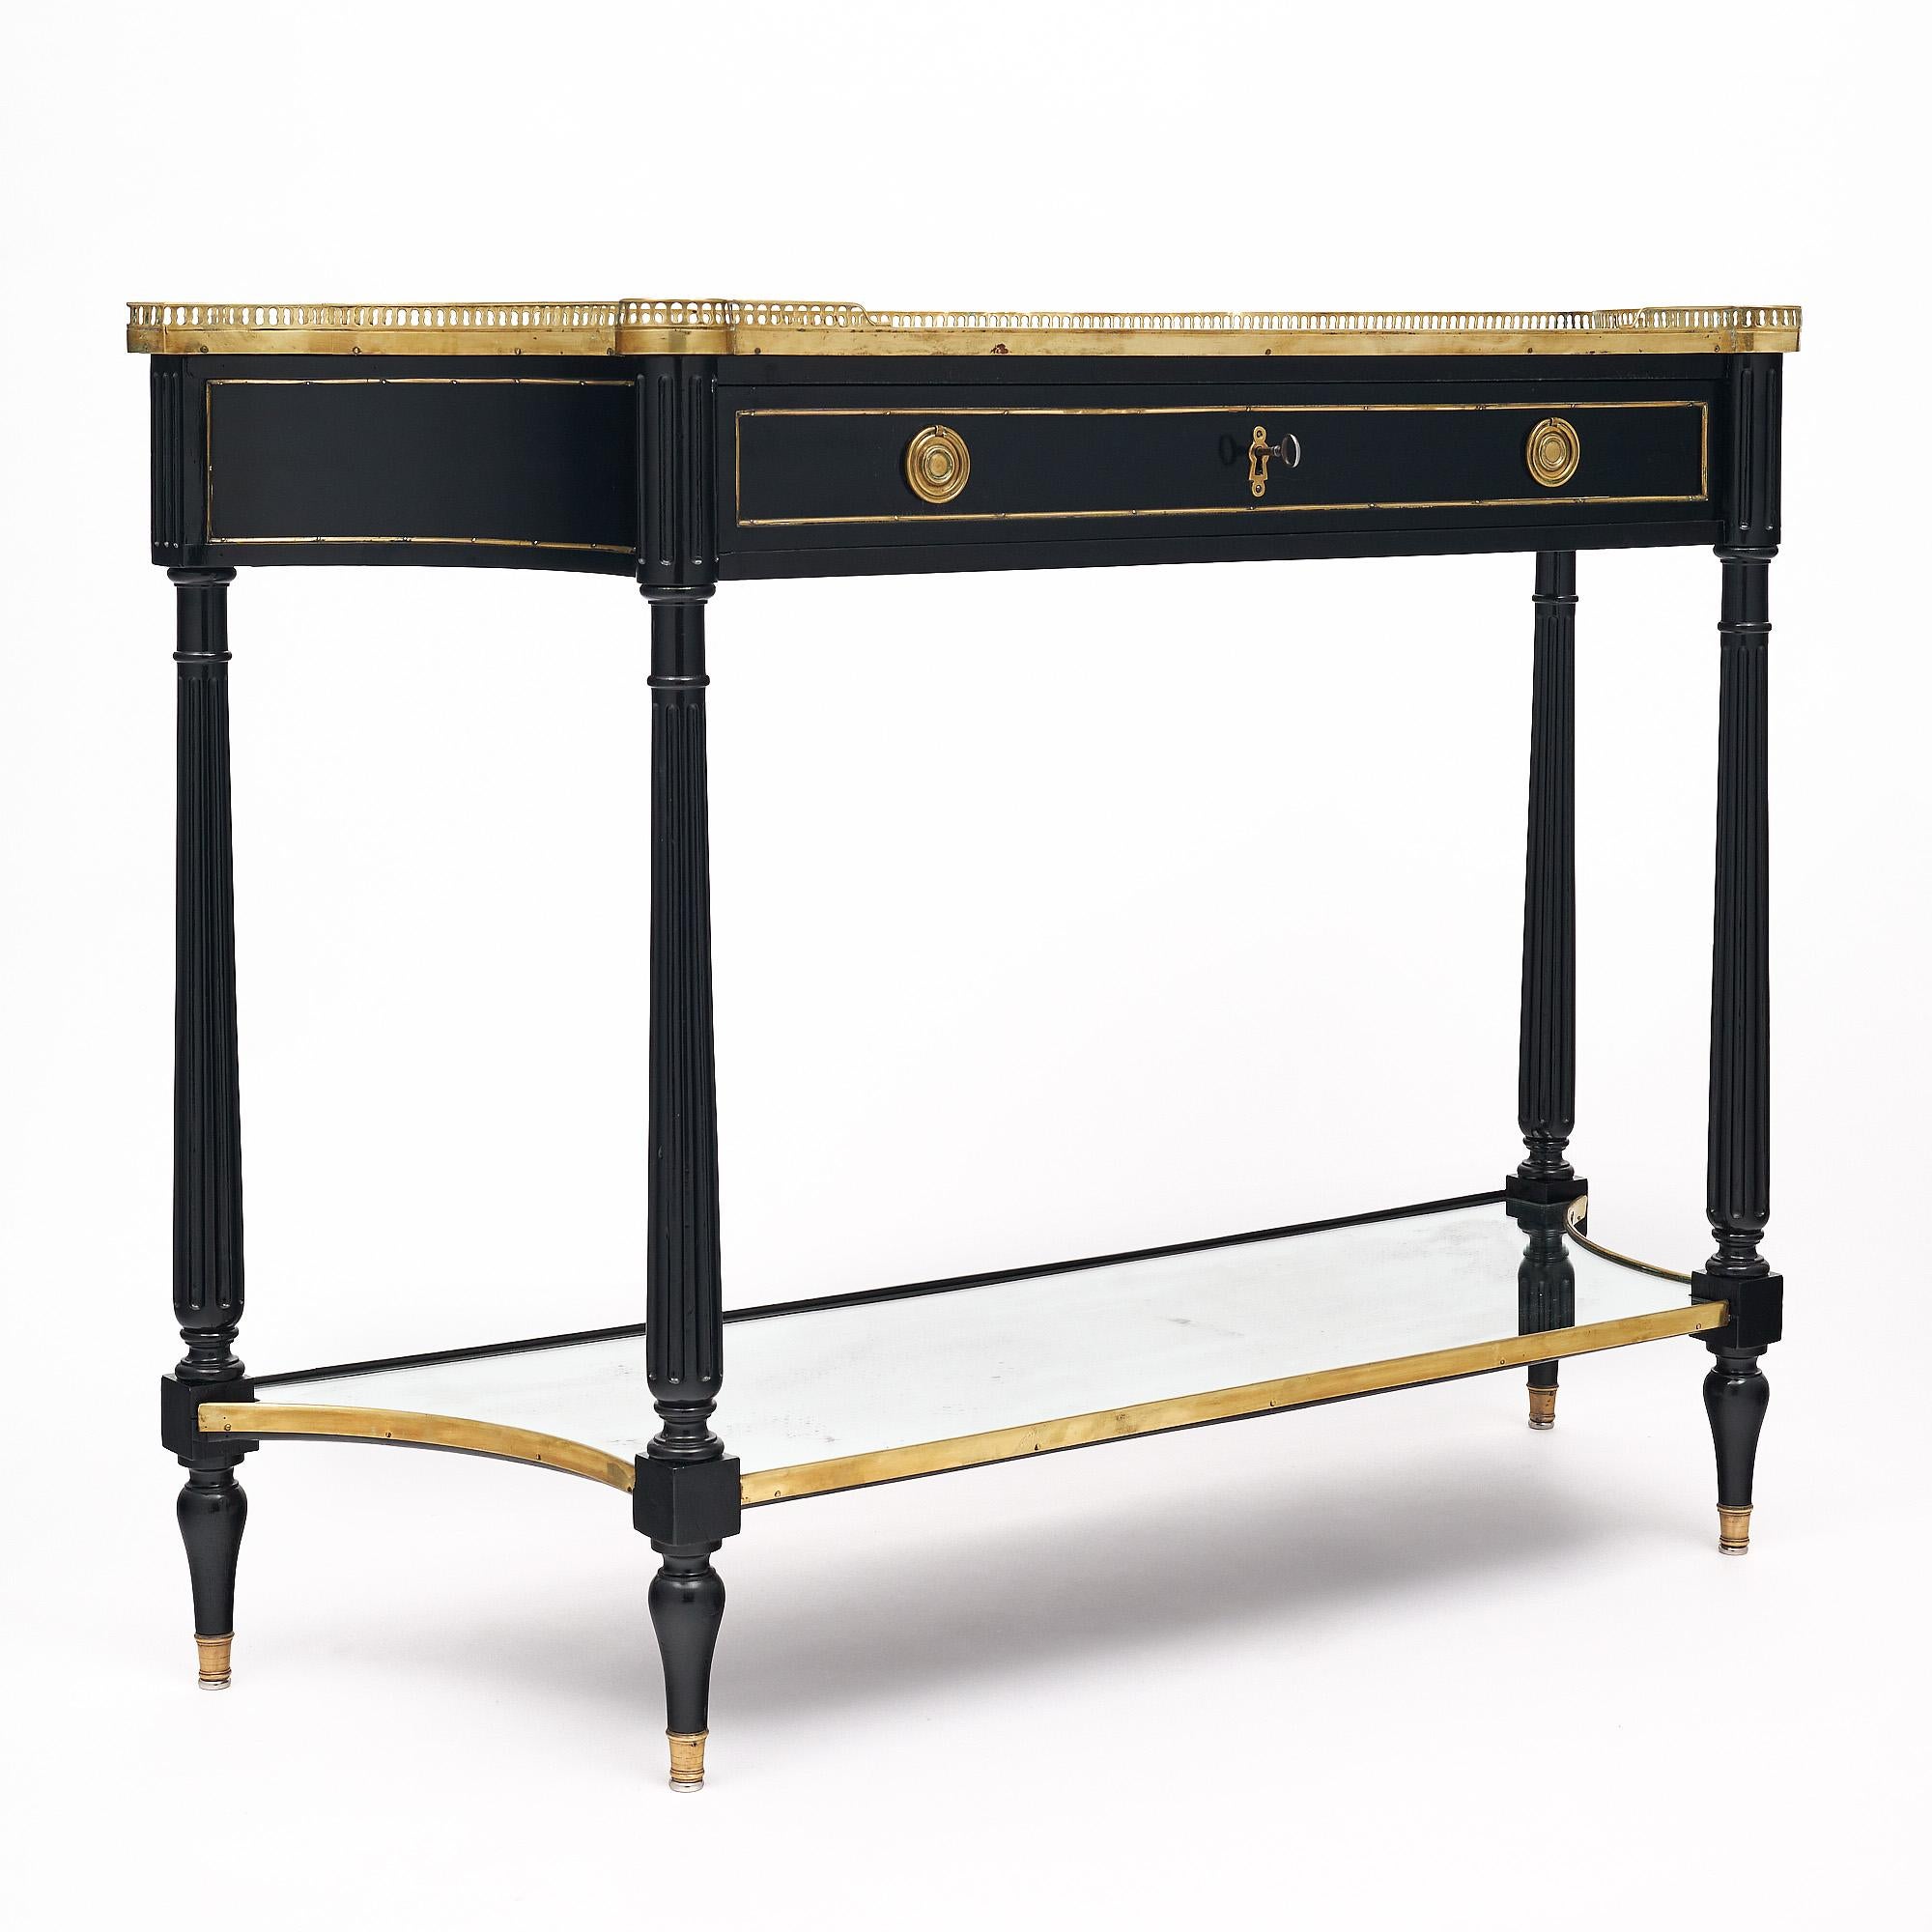 Console table from France in the Louis XVI style. This piece has been ebonized and finished in a lustrous Museum quality French polish. There is one dovetailed drawer that has a working lock and key. The hardware and trim throughout is all finely